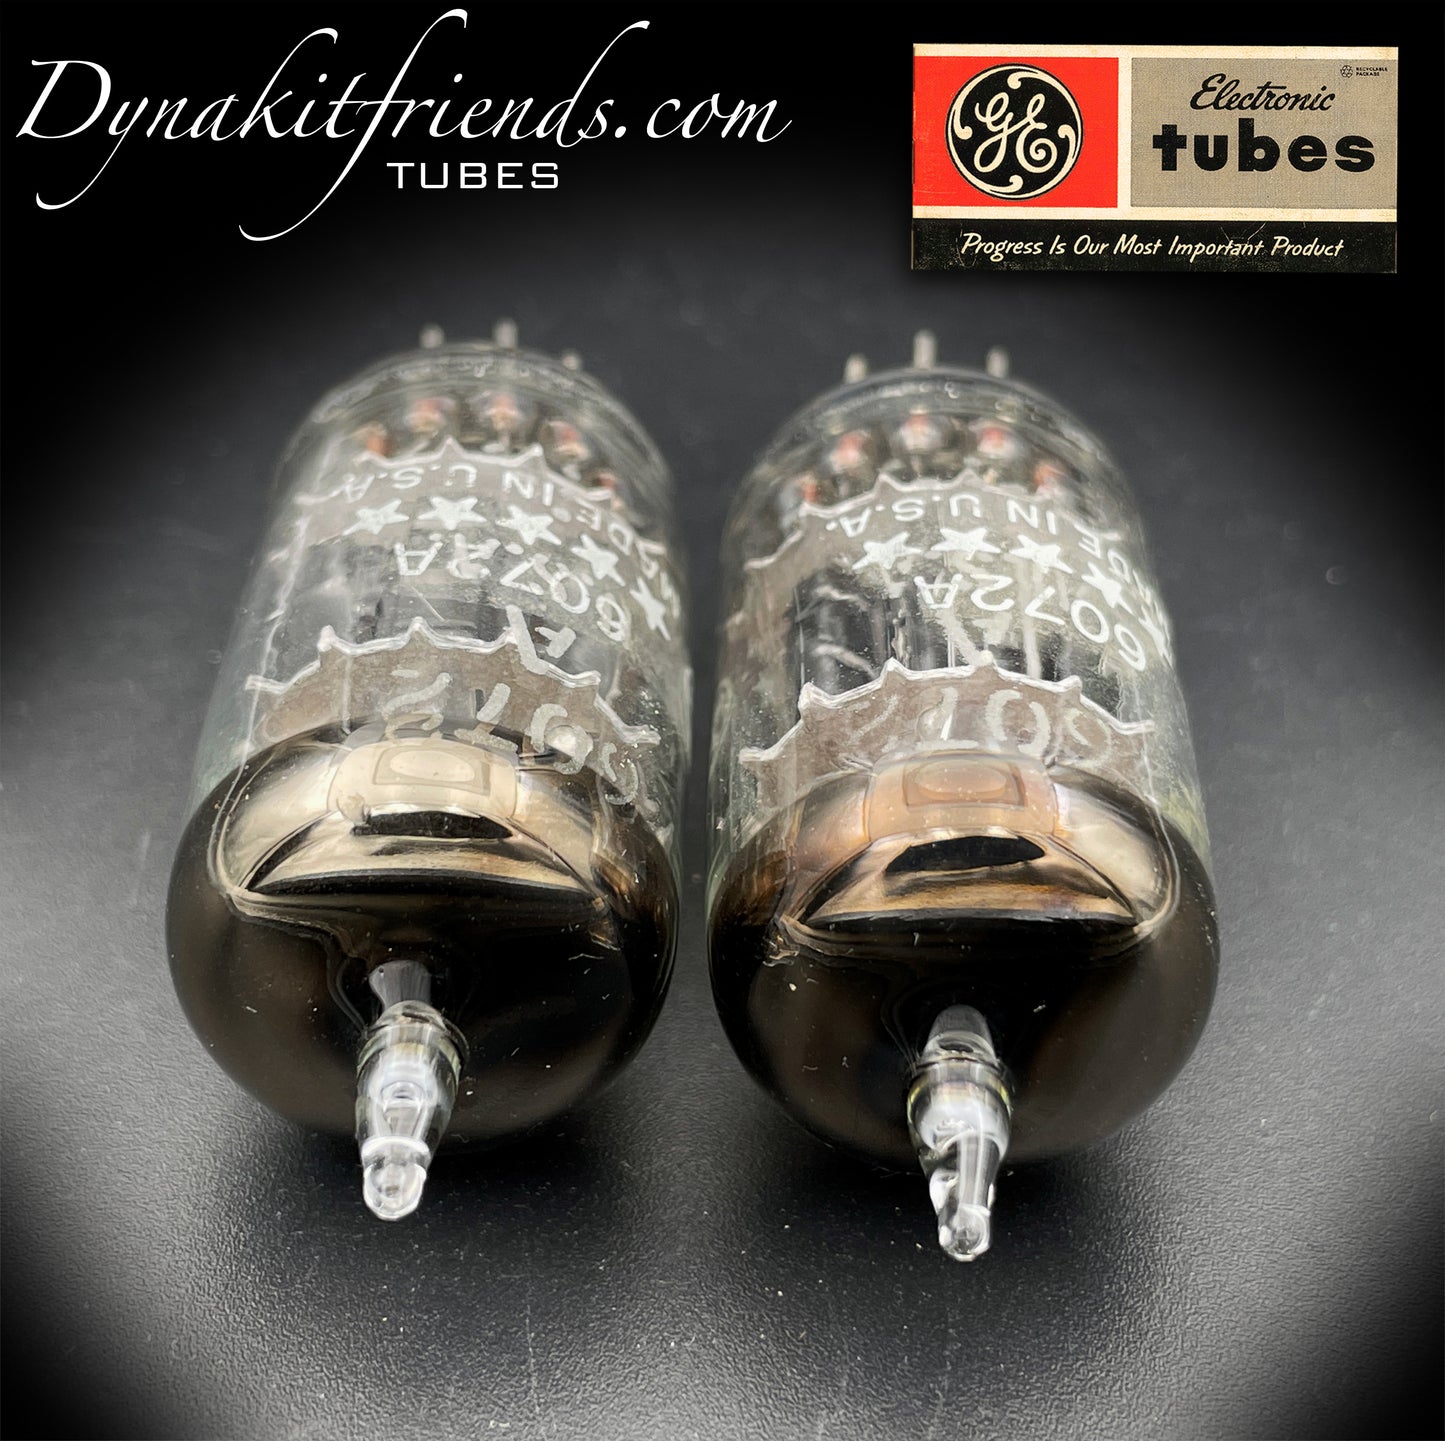 6072 ( 12AY7 ) NOS GE 5-Star Black Plates Halo Getter Vintage 1958 Audio Tubes Matched Pair